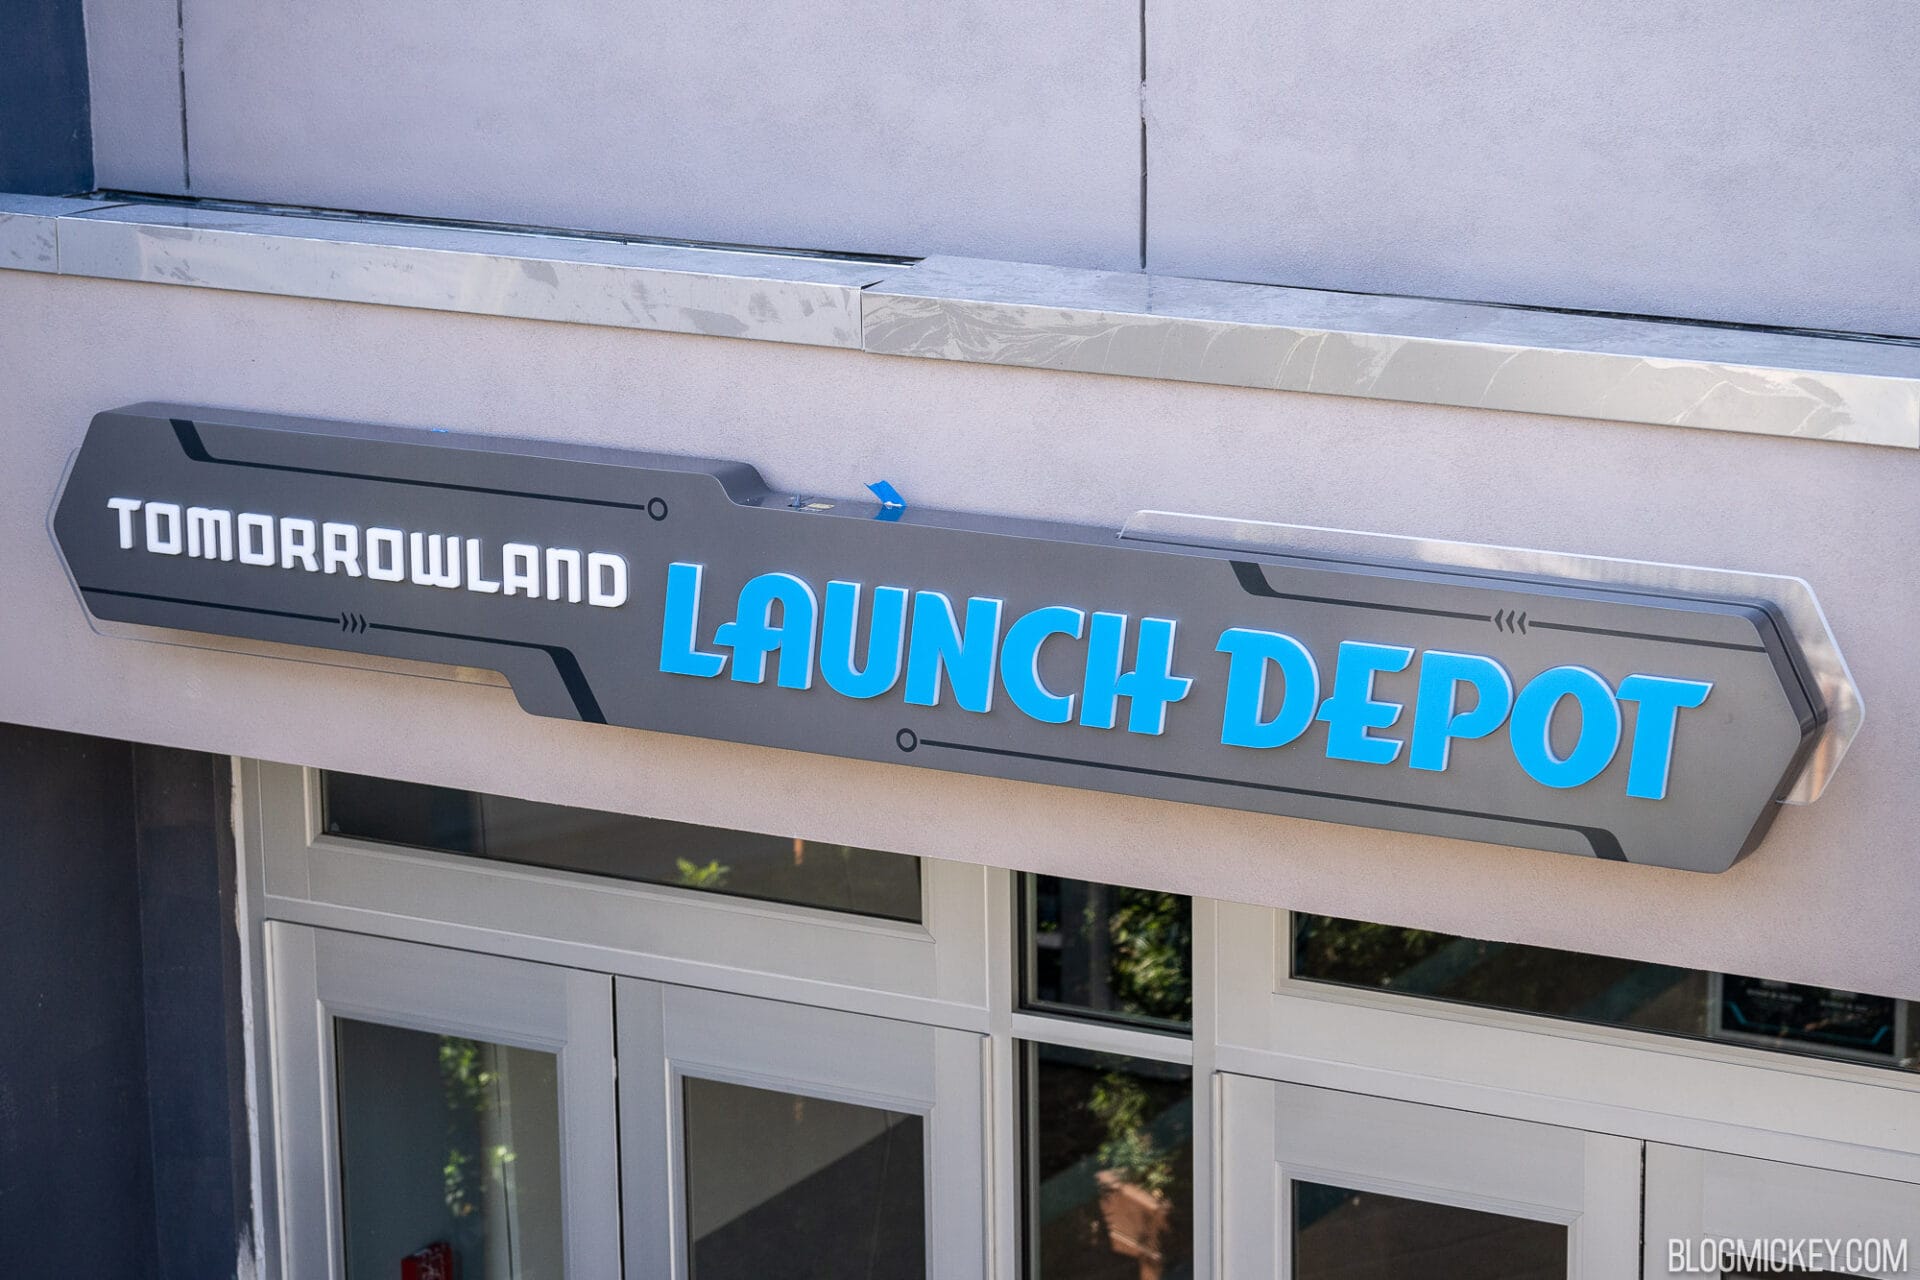 tomorrowland-launch-depot-sign-installed-5-1920x1280.jpg